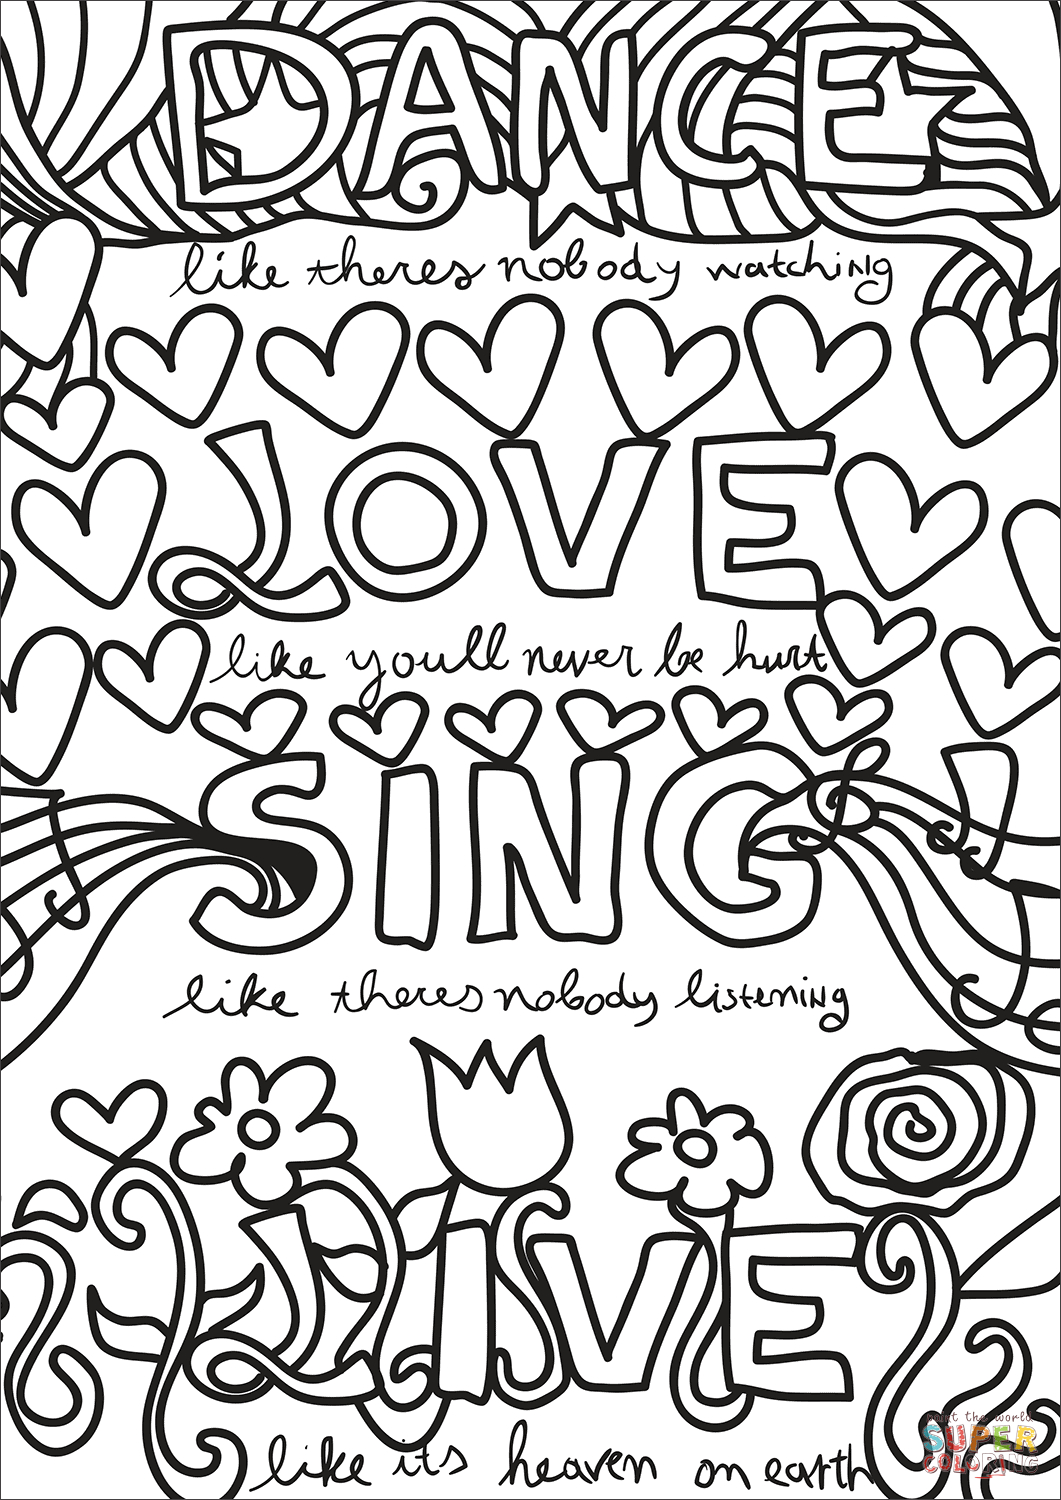 Dancing Coloring Page Images Of Dance Coloring Pages Sabadaphnecottage